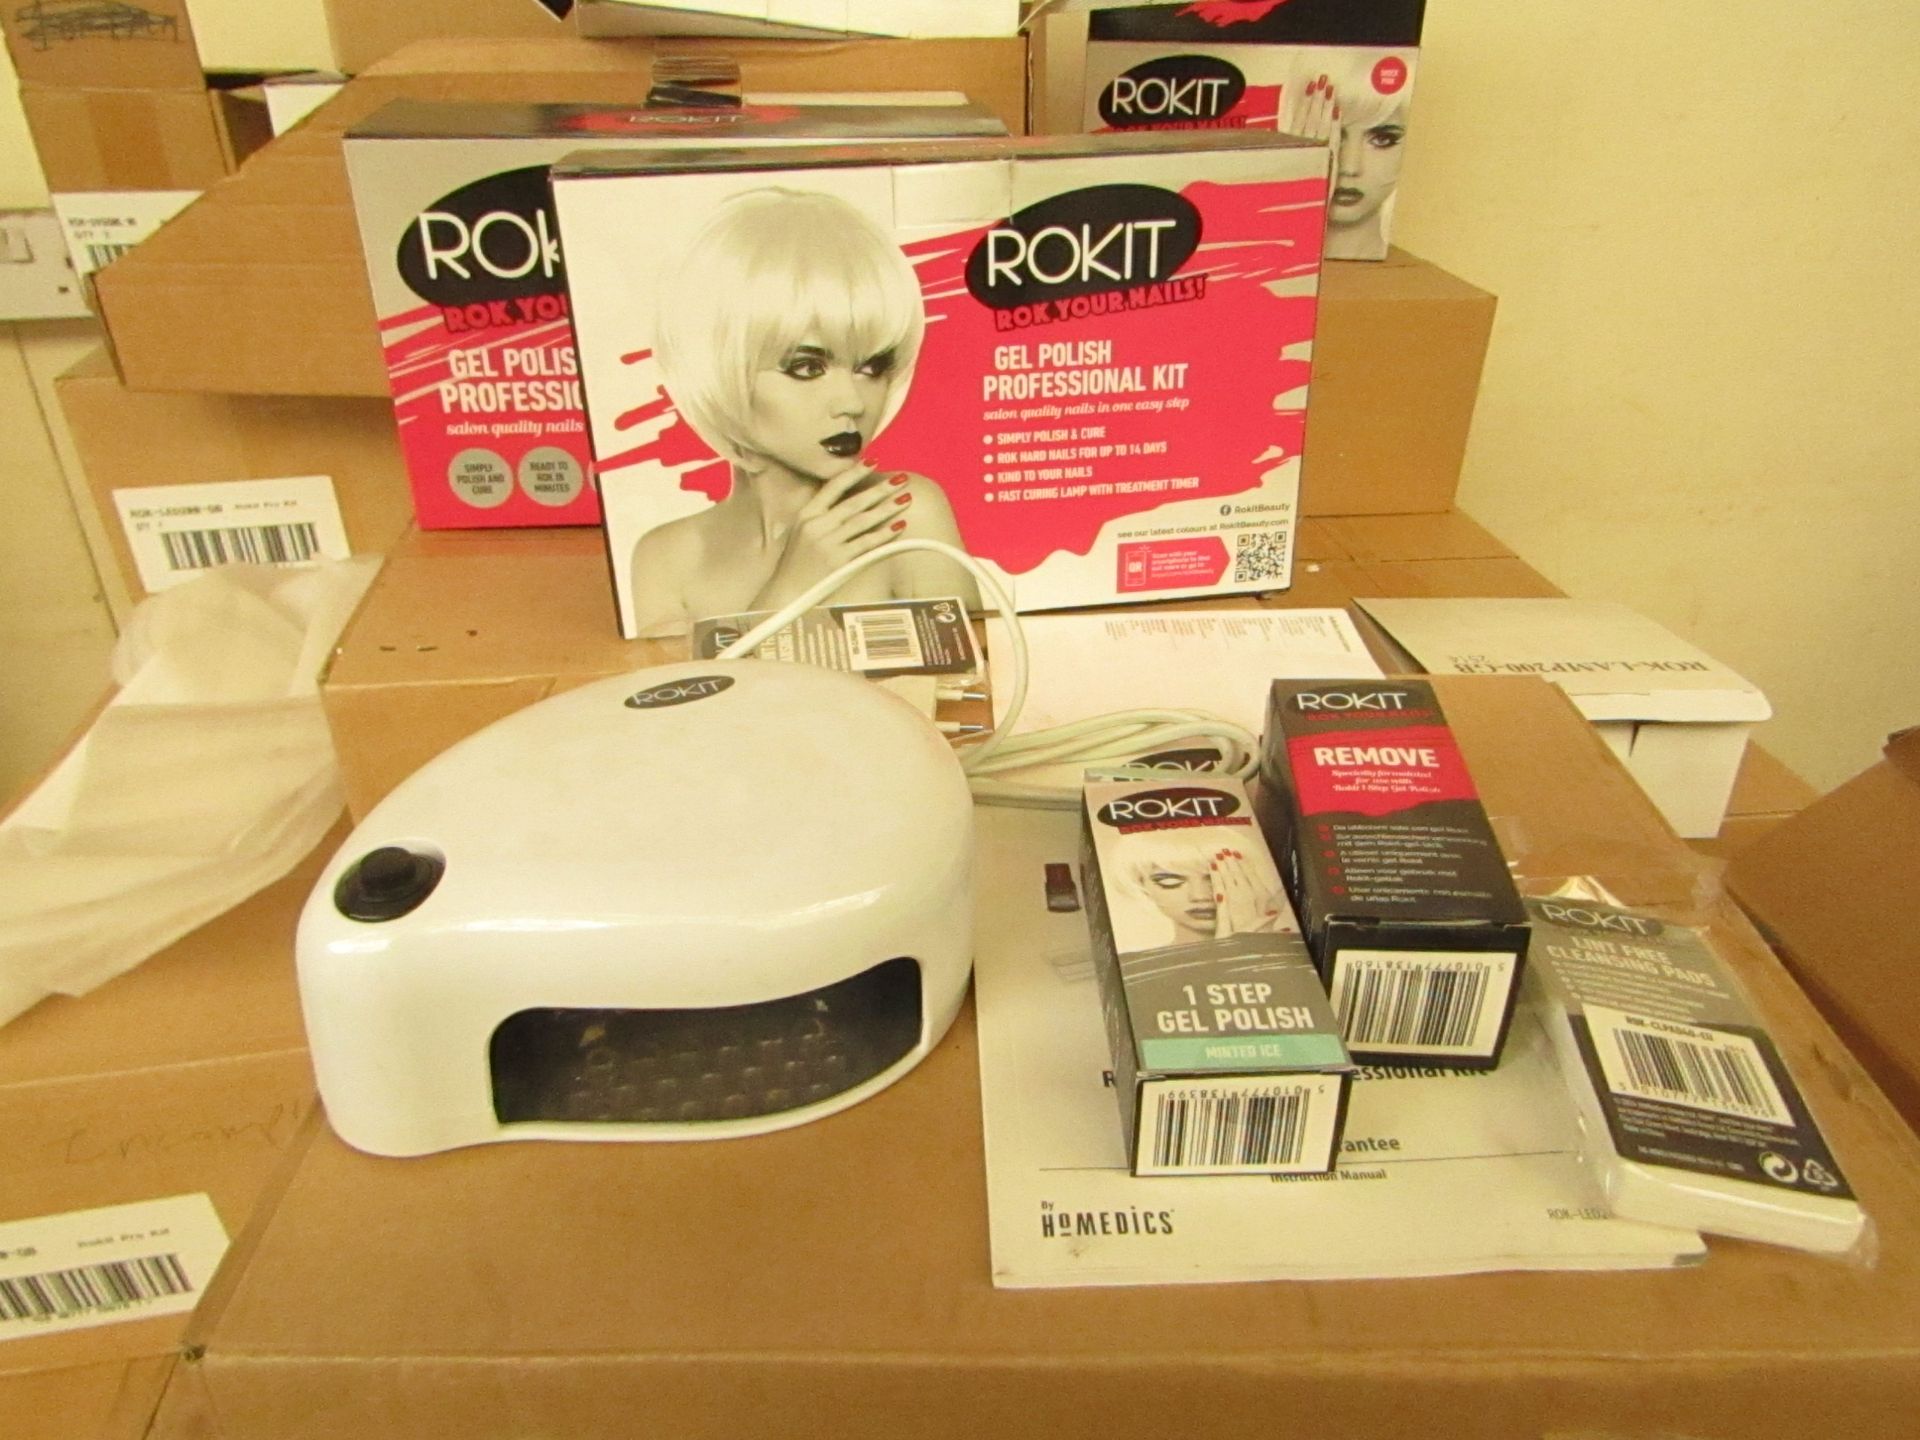 2 x ROKIT - Professional Gel Polish Kit - (Please Note These Sets Are Not Complete & May Be Missing